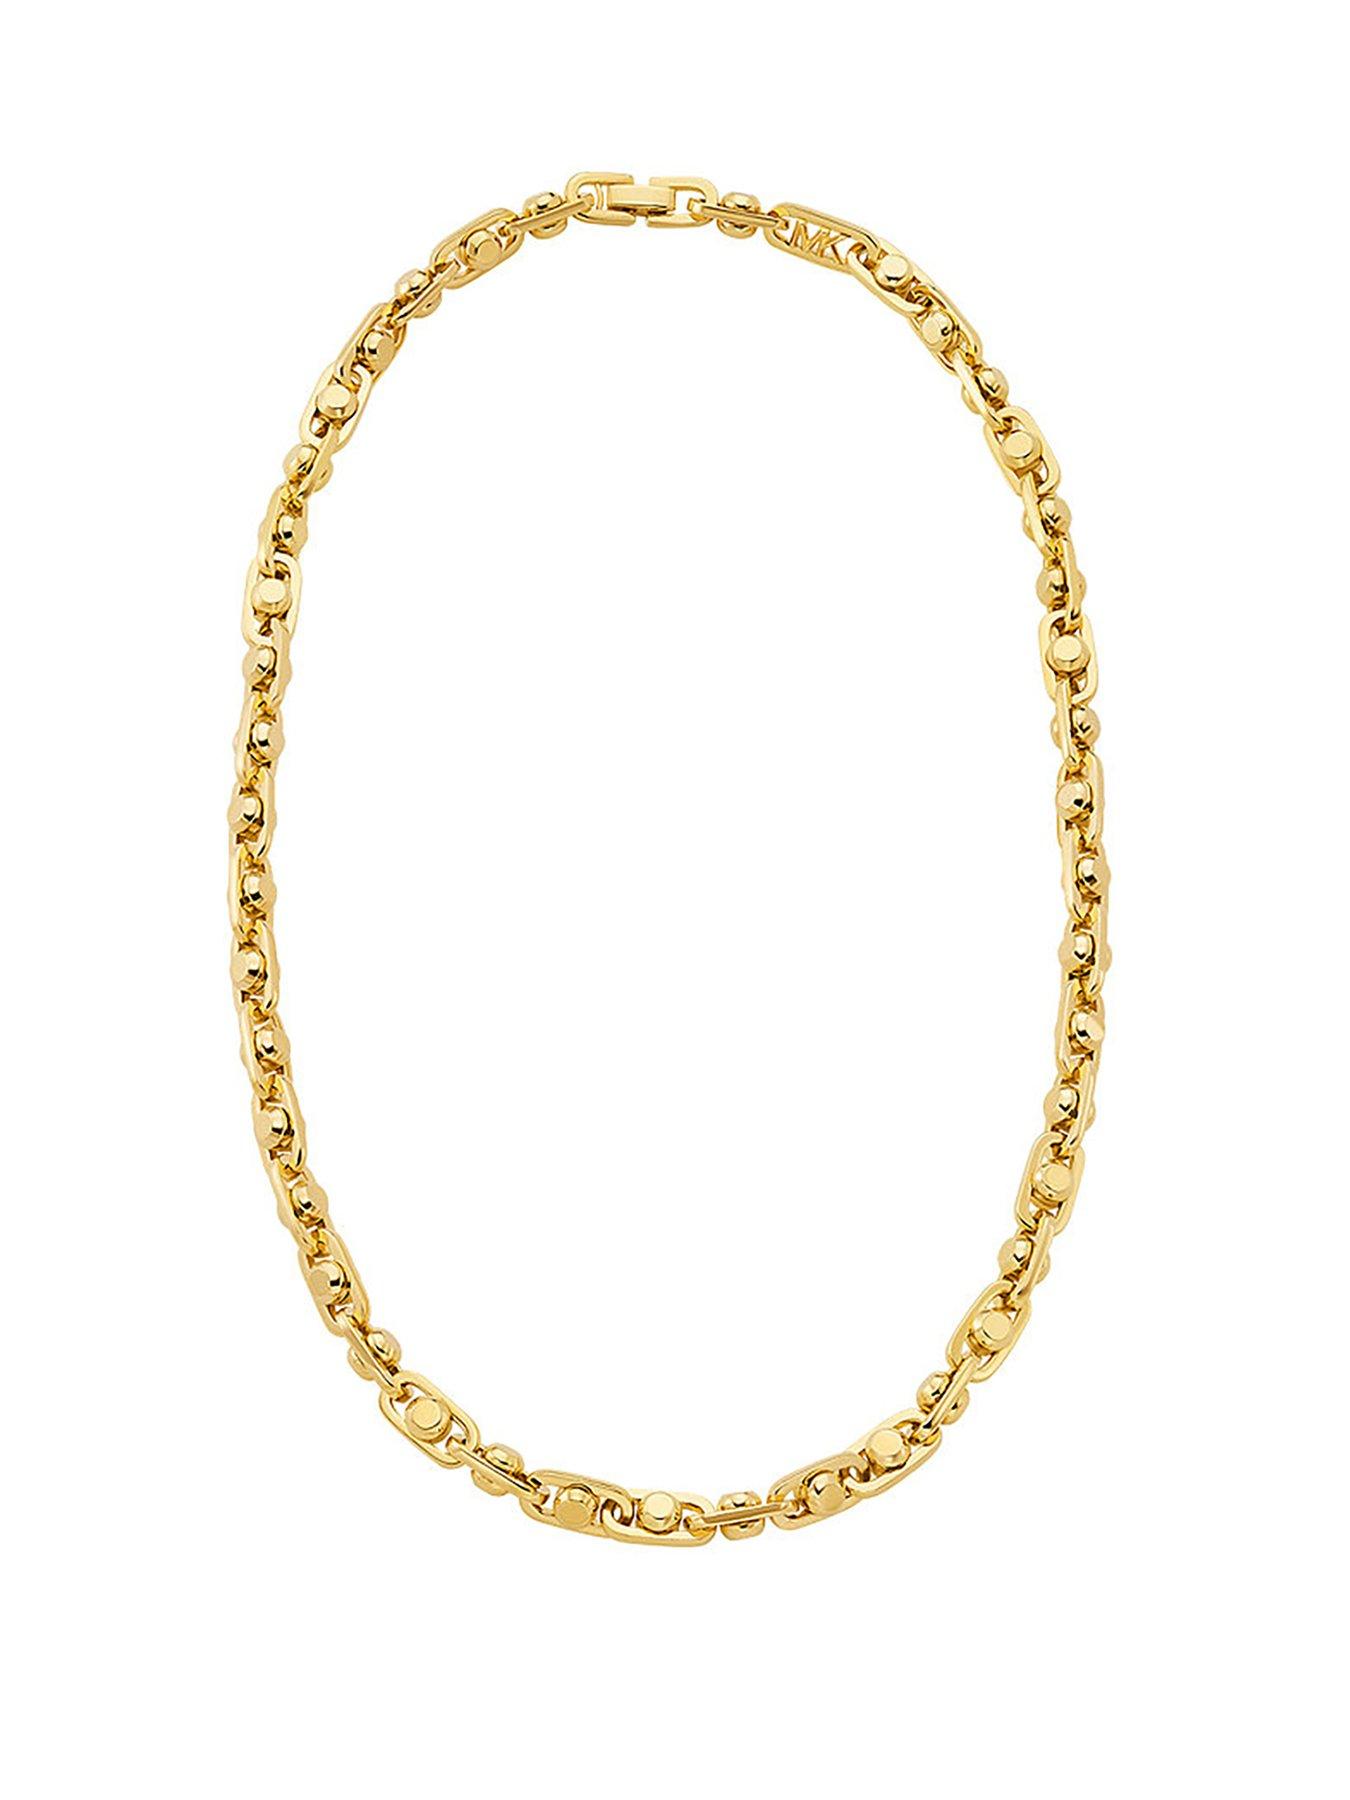 Michael Kors Sterling Silver Pave Empire Link Chain Bracelet | CoolSprings  Galleria